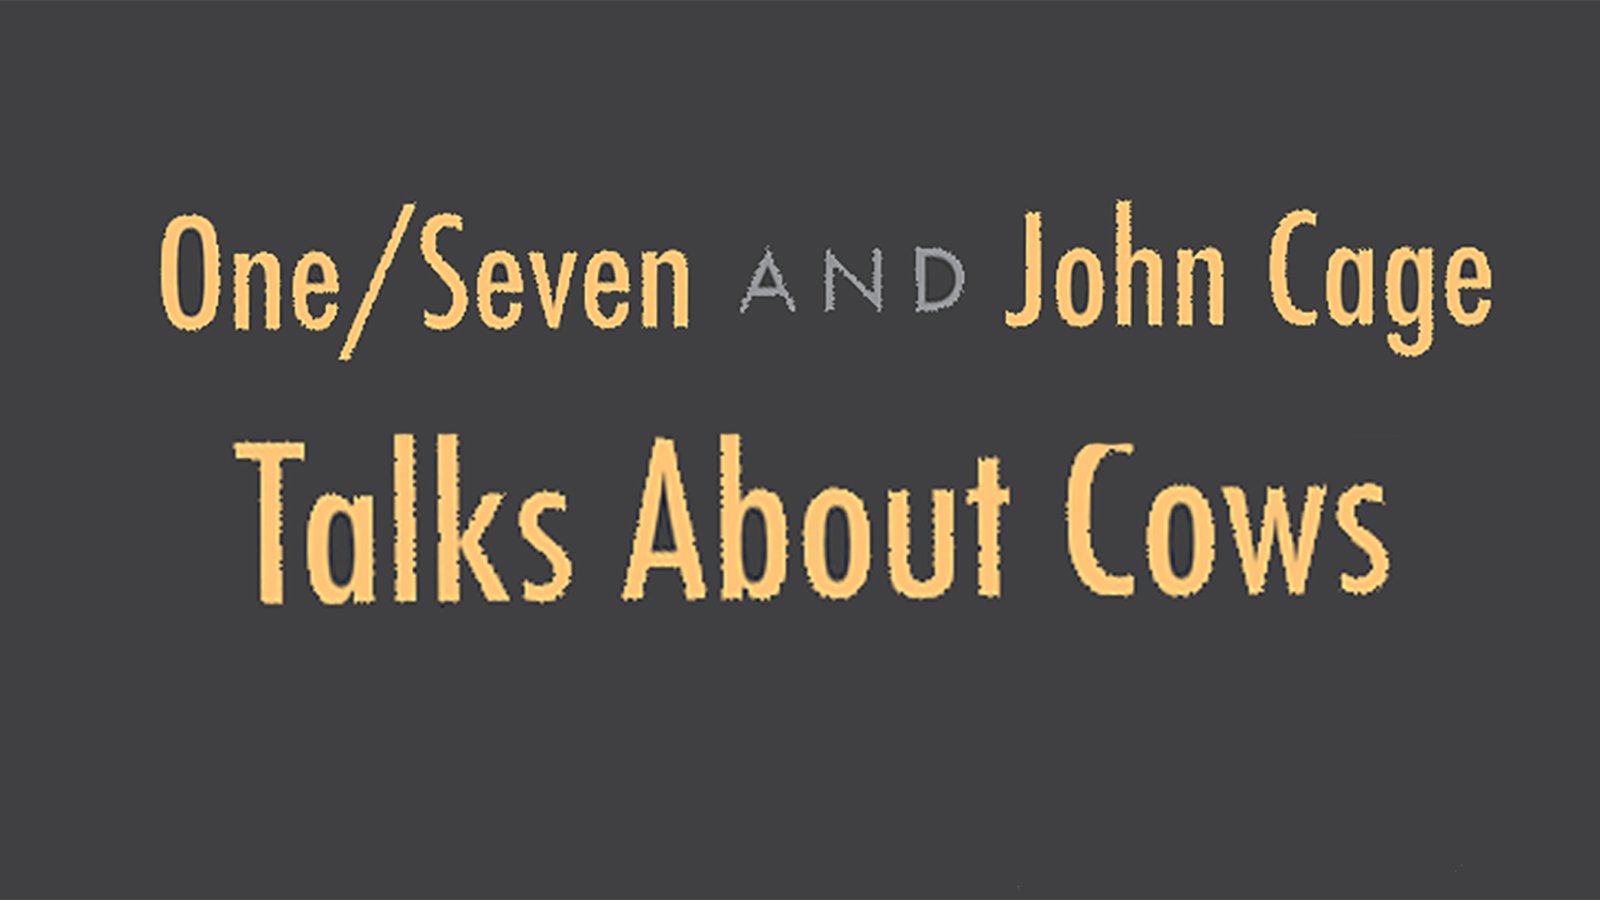 John Cage - Talks About Cows & One/Seven